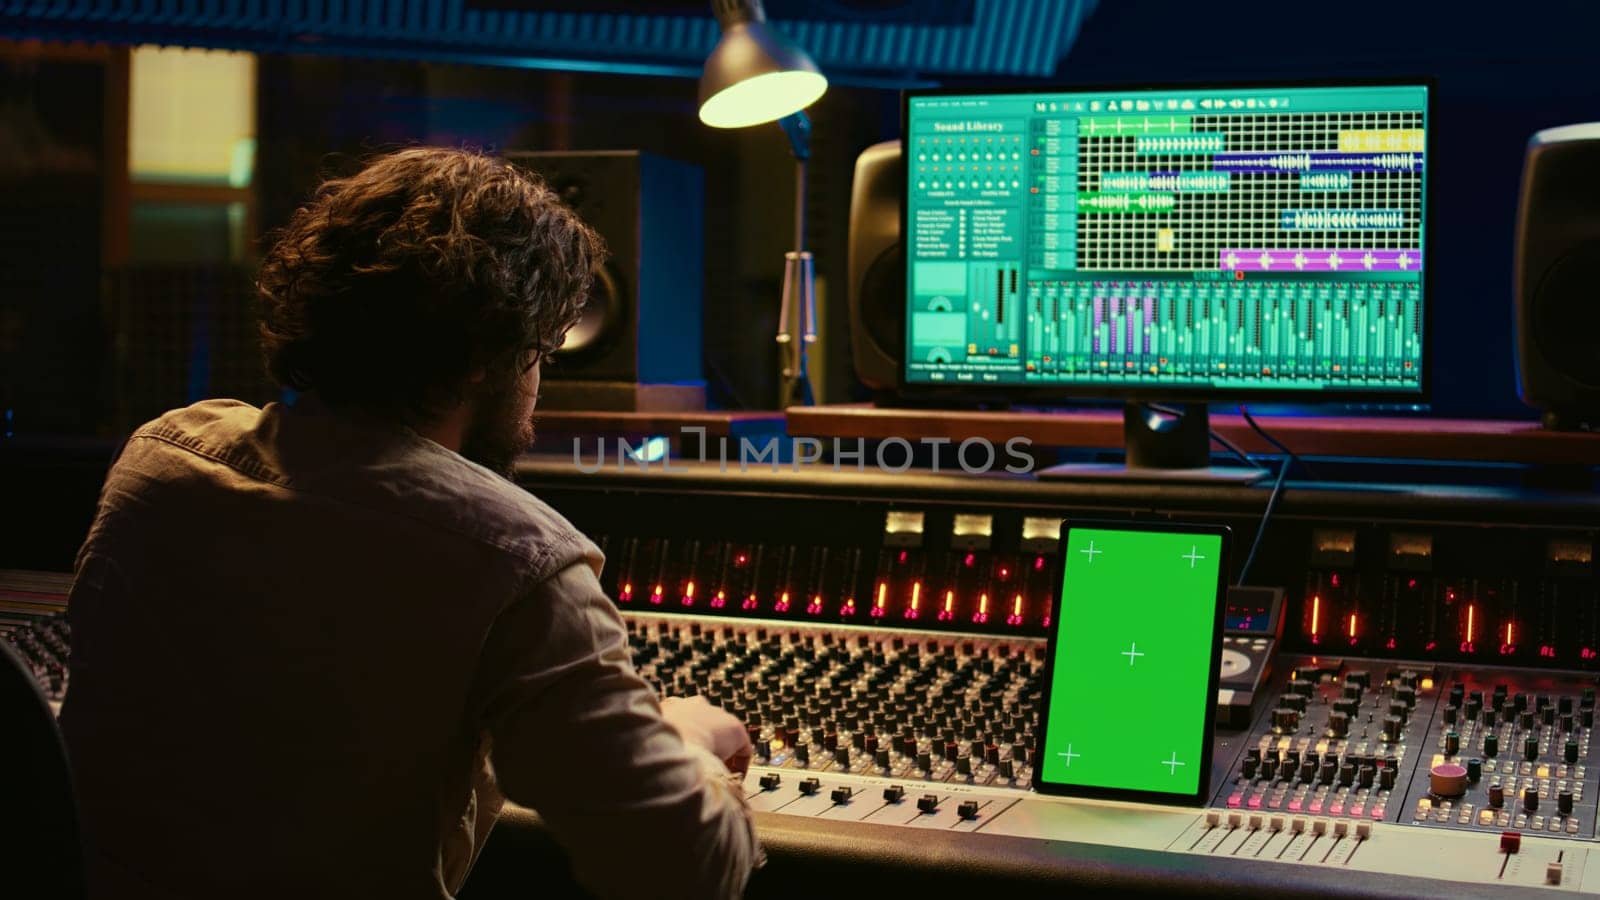 Professional audio expert mixing and mastering tracks in music production studio, pushing buttons and switchers in control room. Sound engineer recording tunes with greenscreen tablet. Camera B.